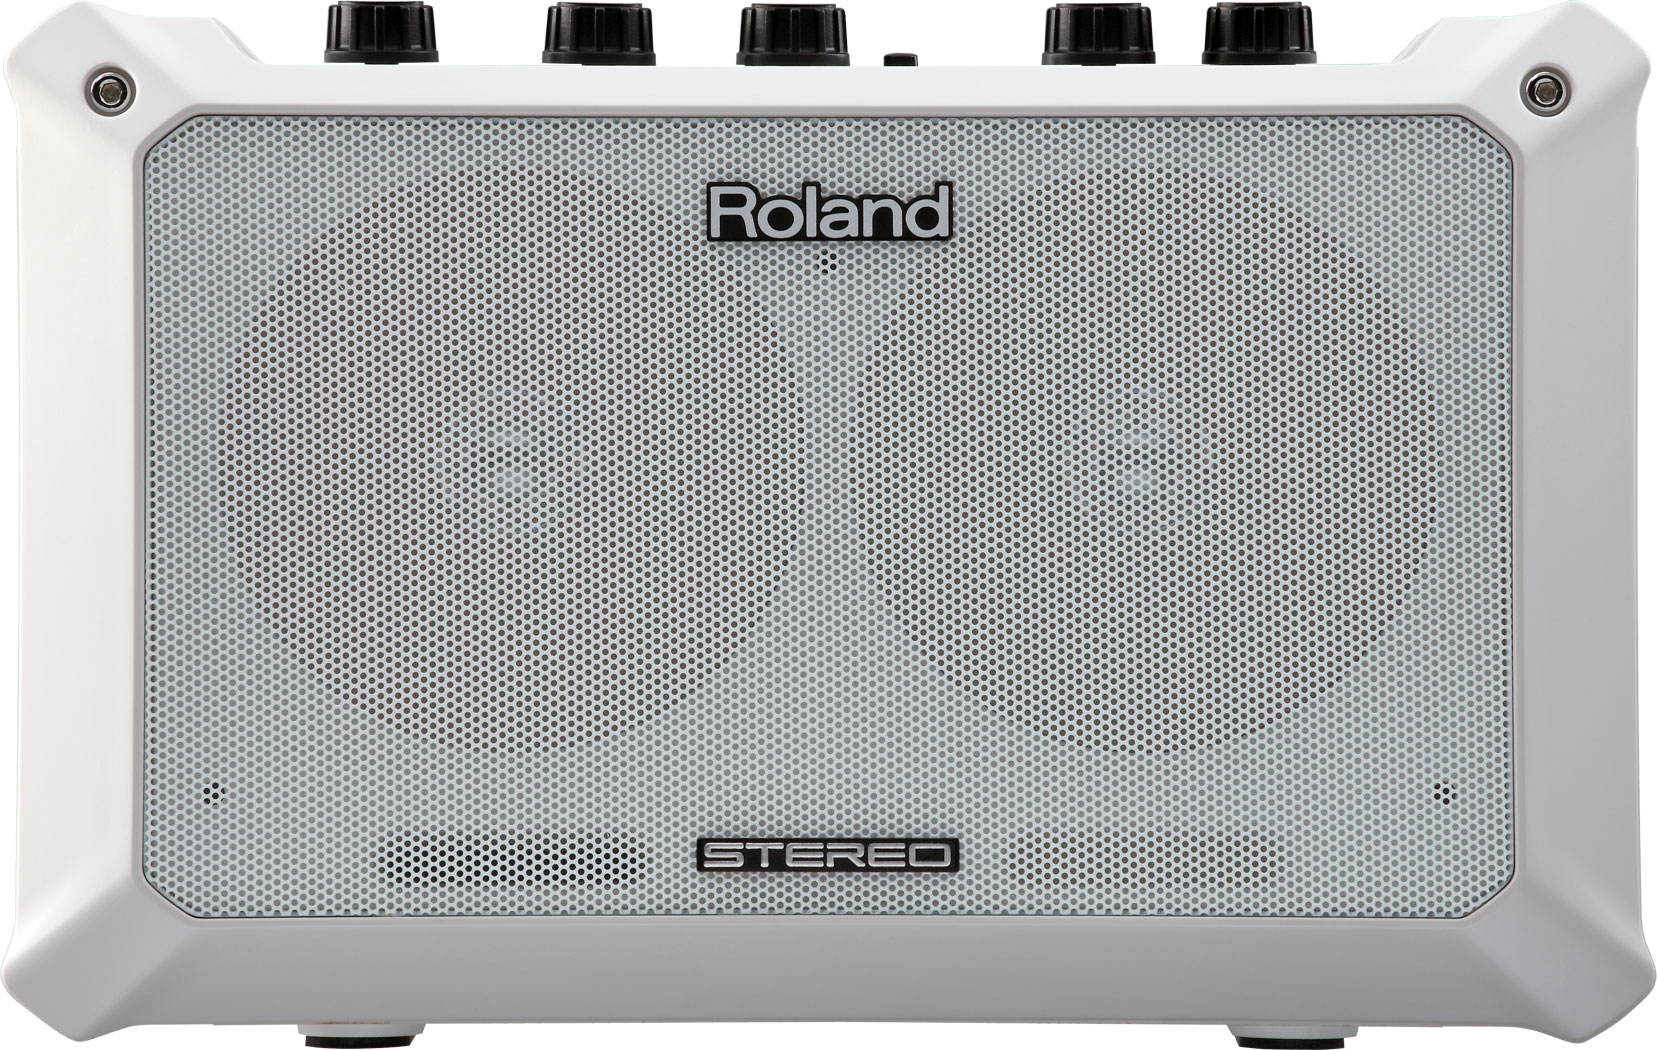 MOBILE BA | Battery-Powered Stereo Amplifier - Roland